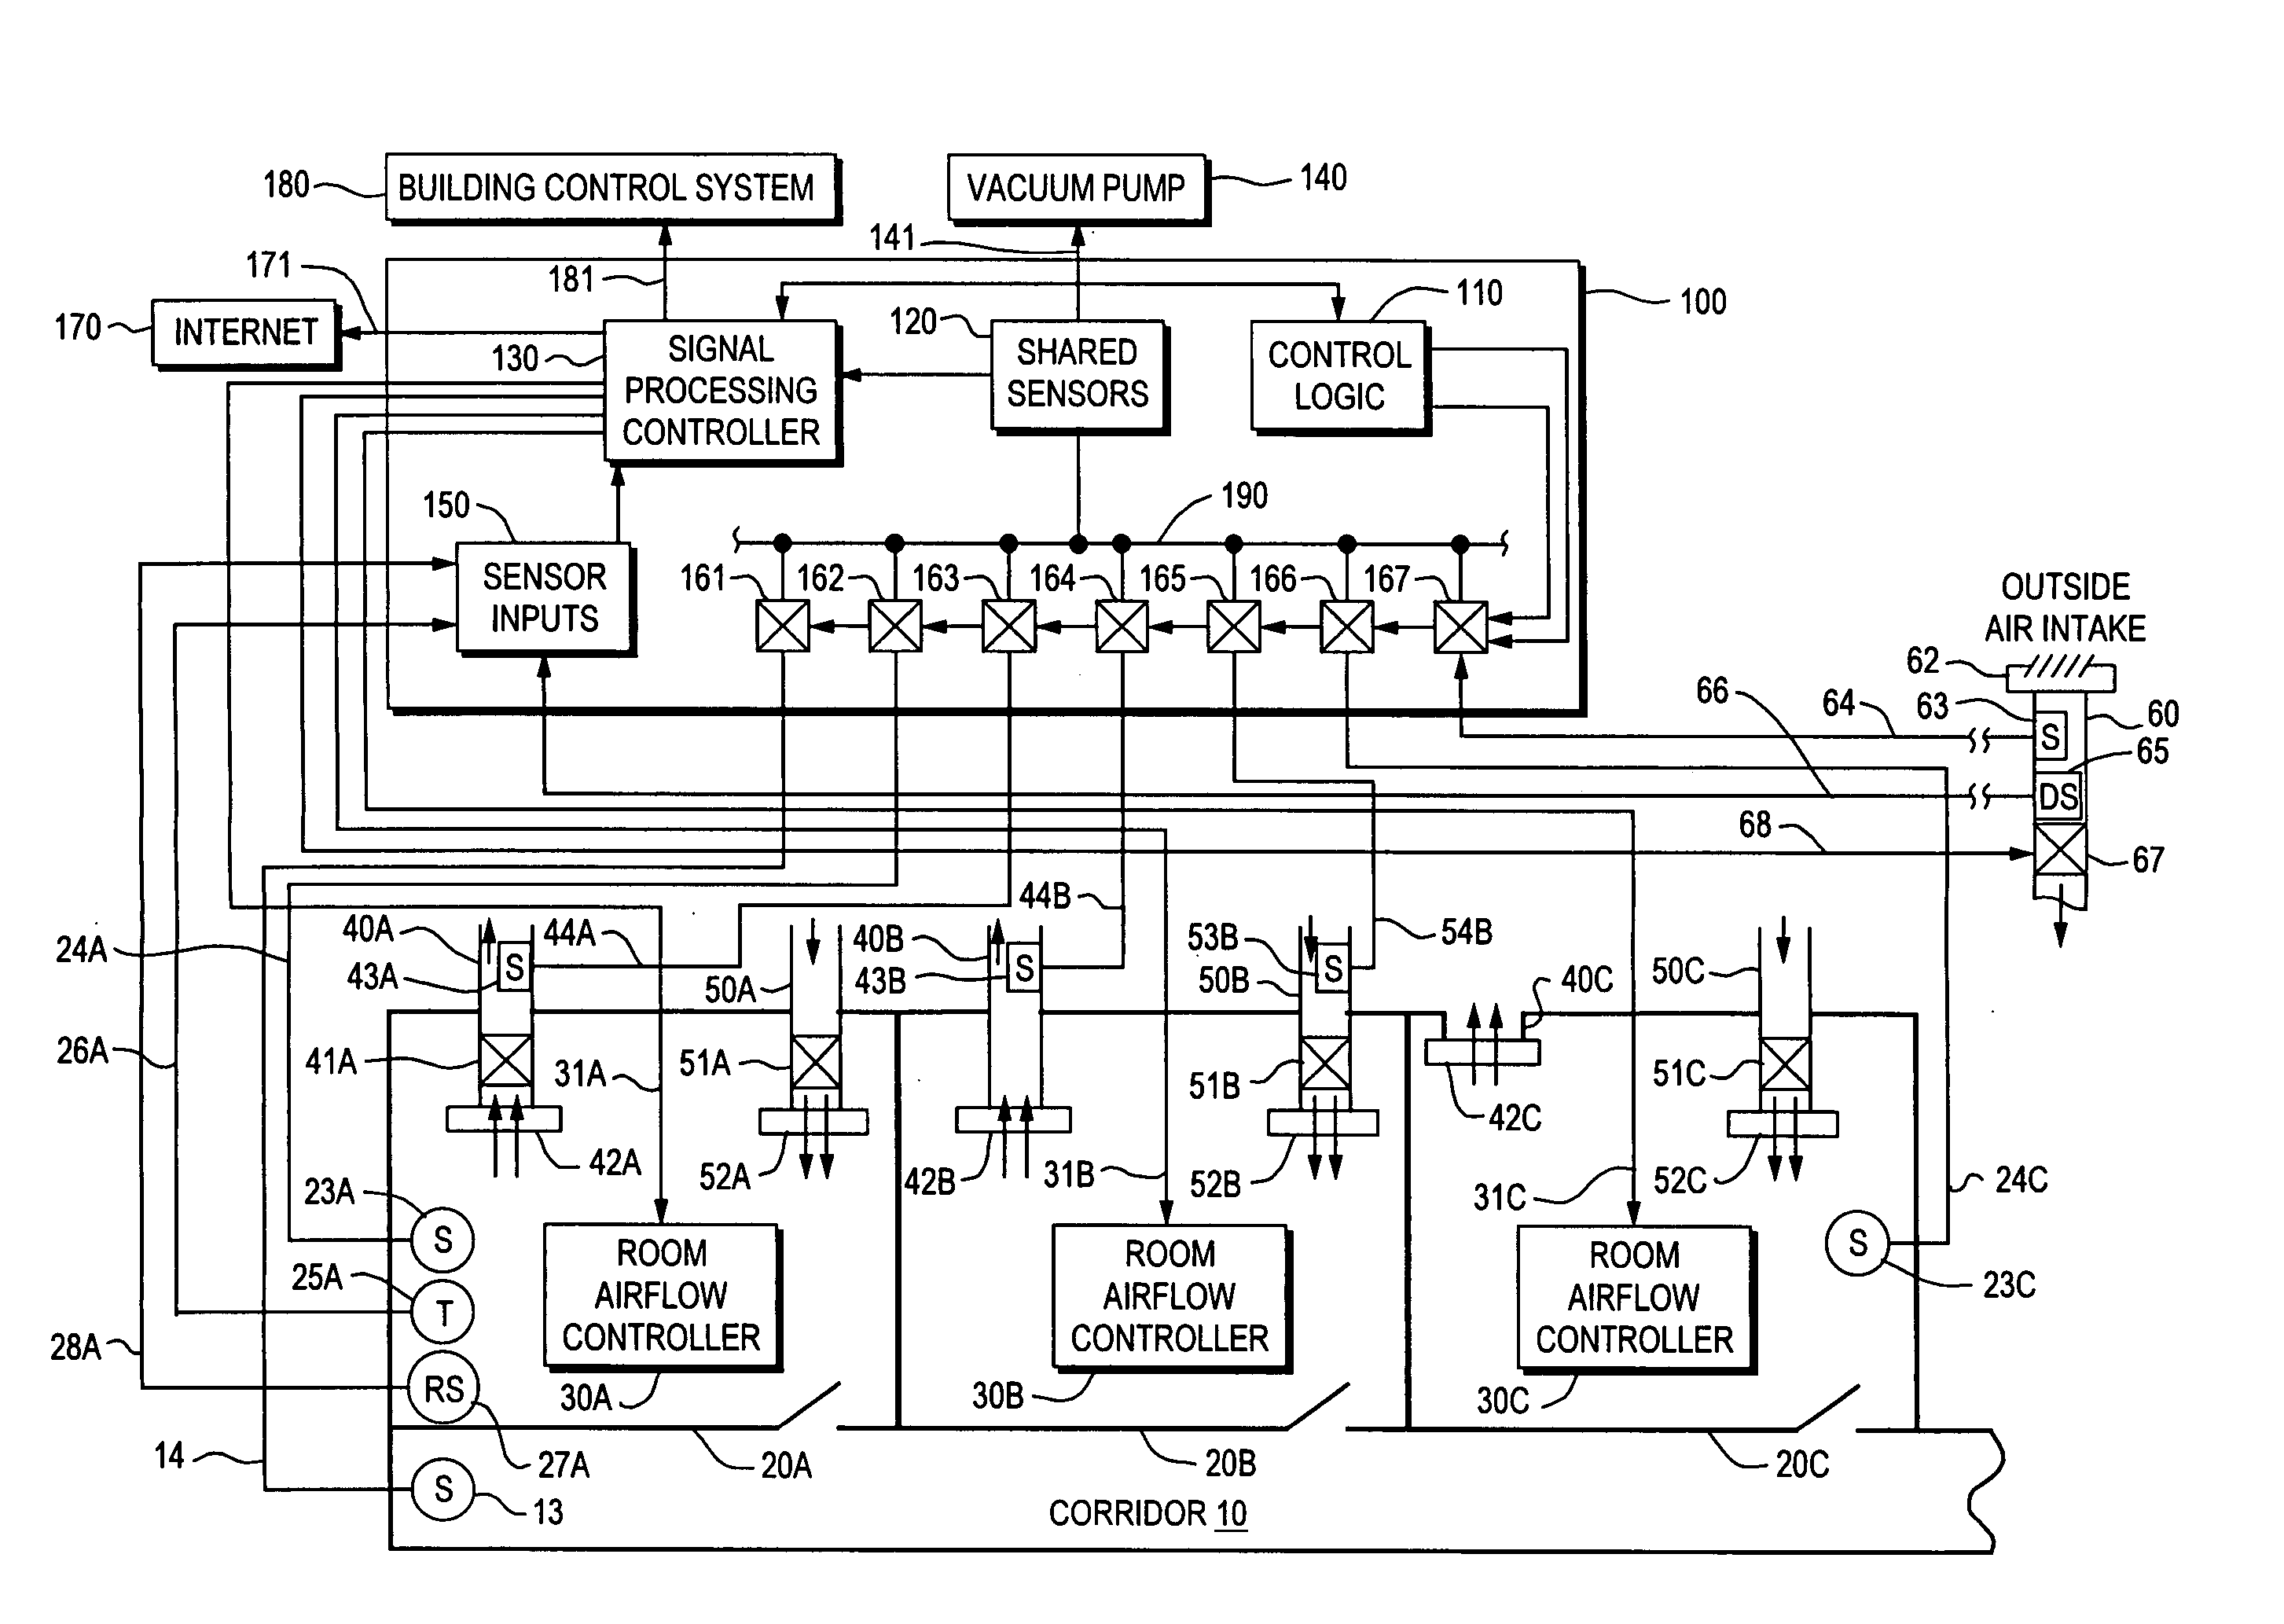 Multipoint air sampling system having common sensors to provide blended air quality parameter information for monitoring and building control